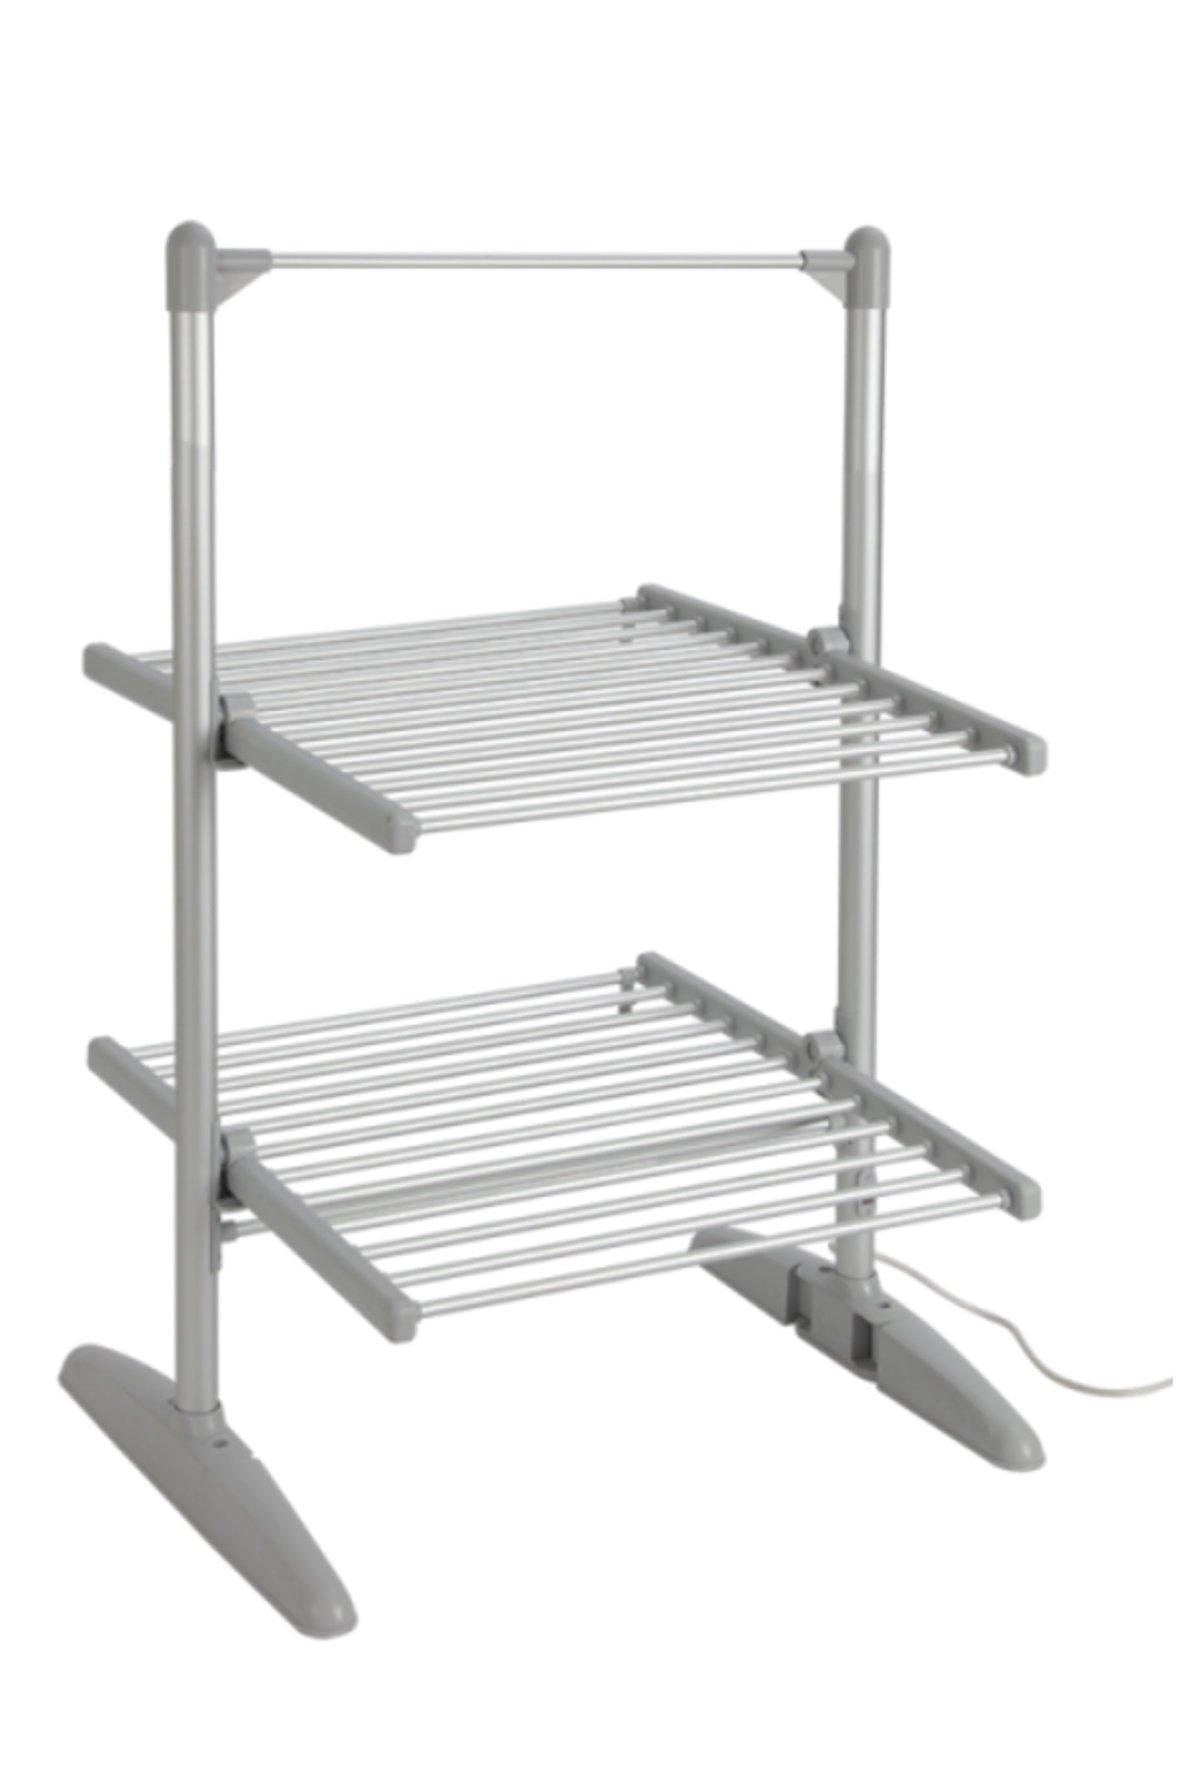 Heated Clothes Airer with Cover - 2 Tier